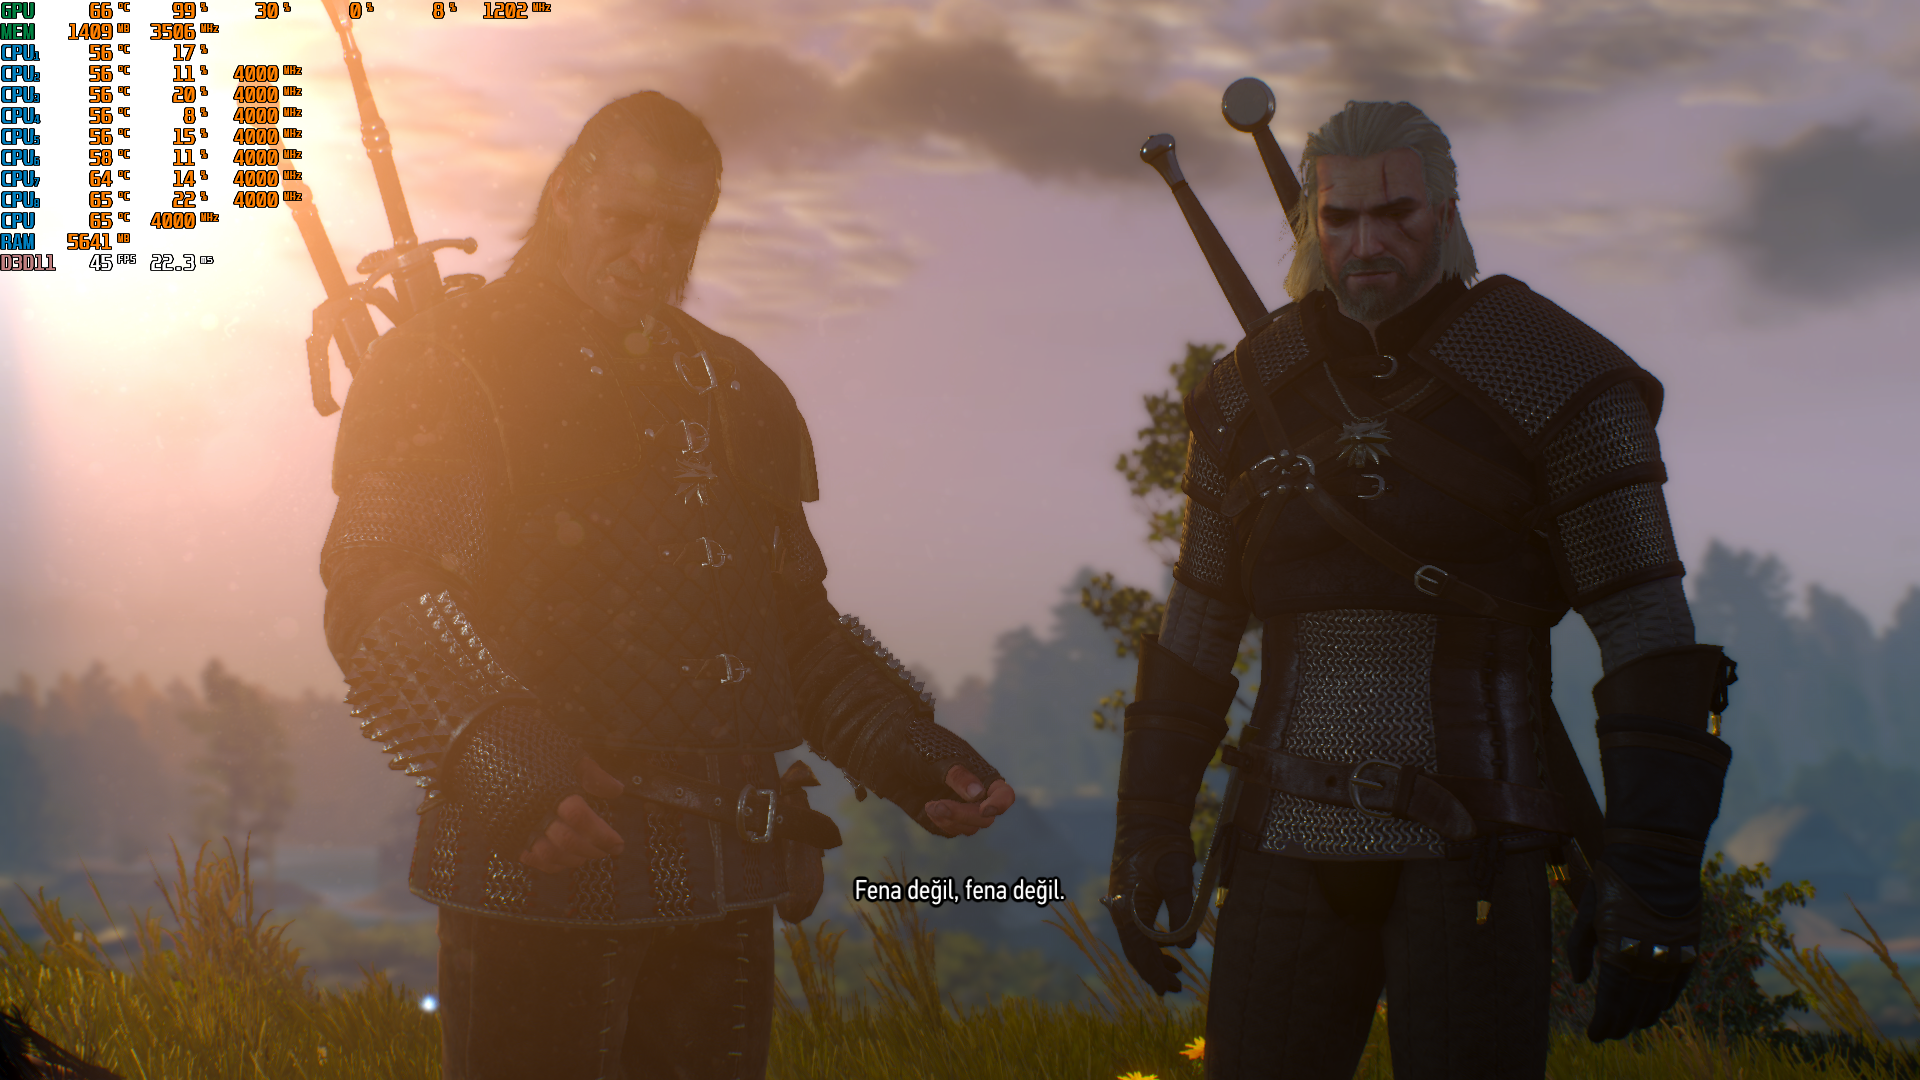 witcher3_2021_04_26_02_14_33_380.png